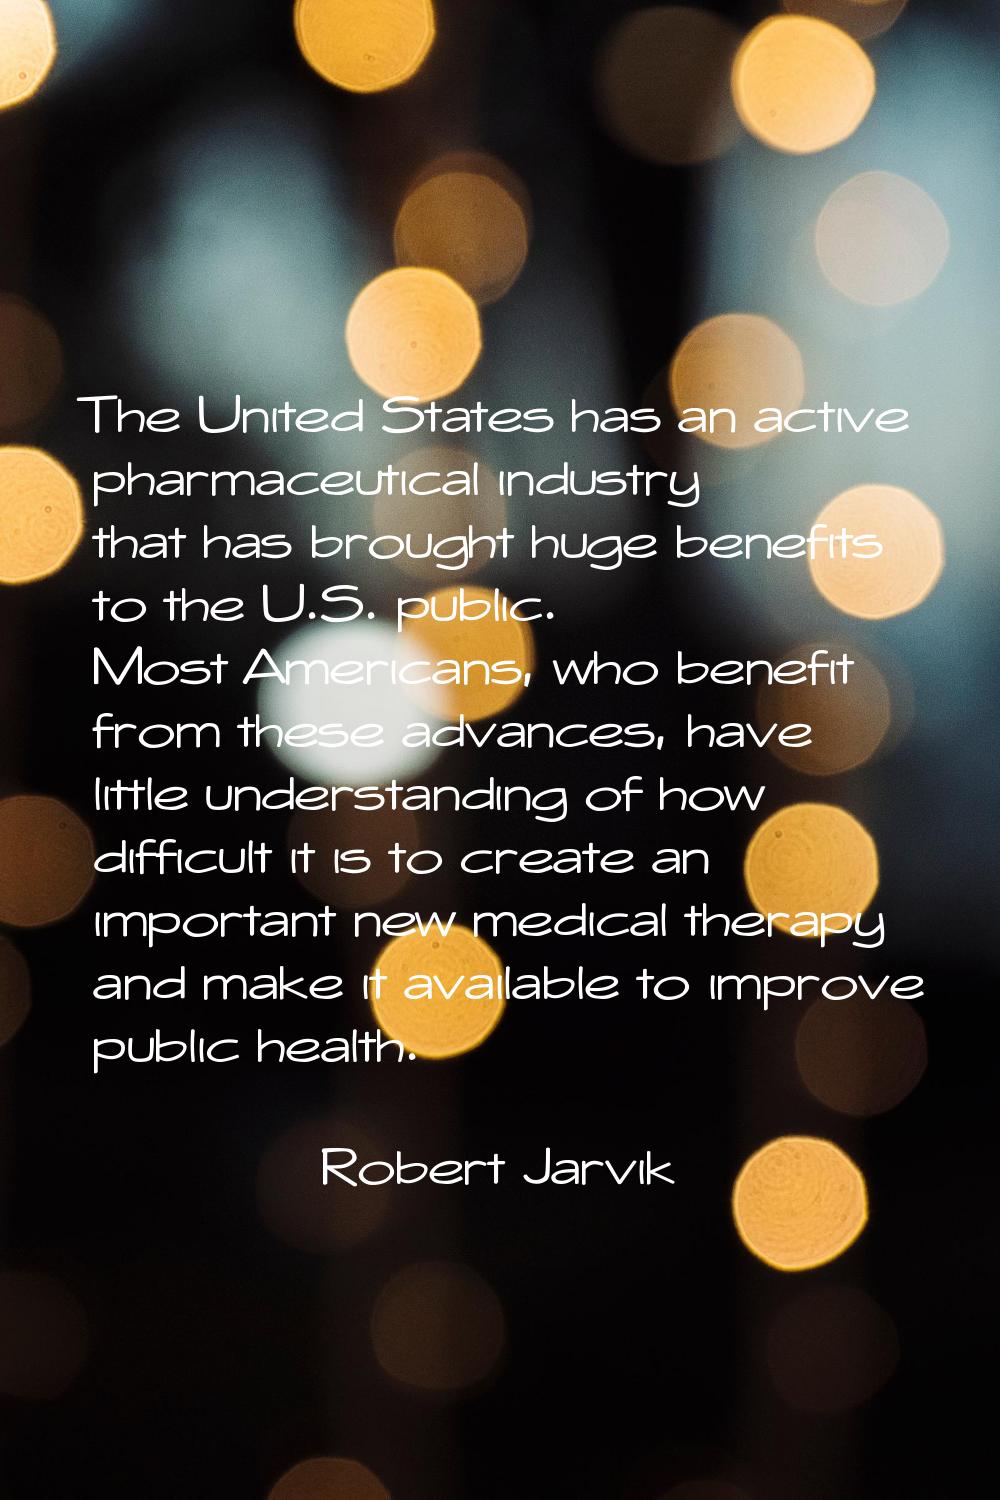 The United States has an active pharmaceutical industry that has brought huge benefits to the U.S. 